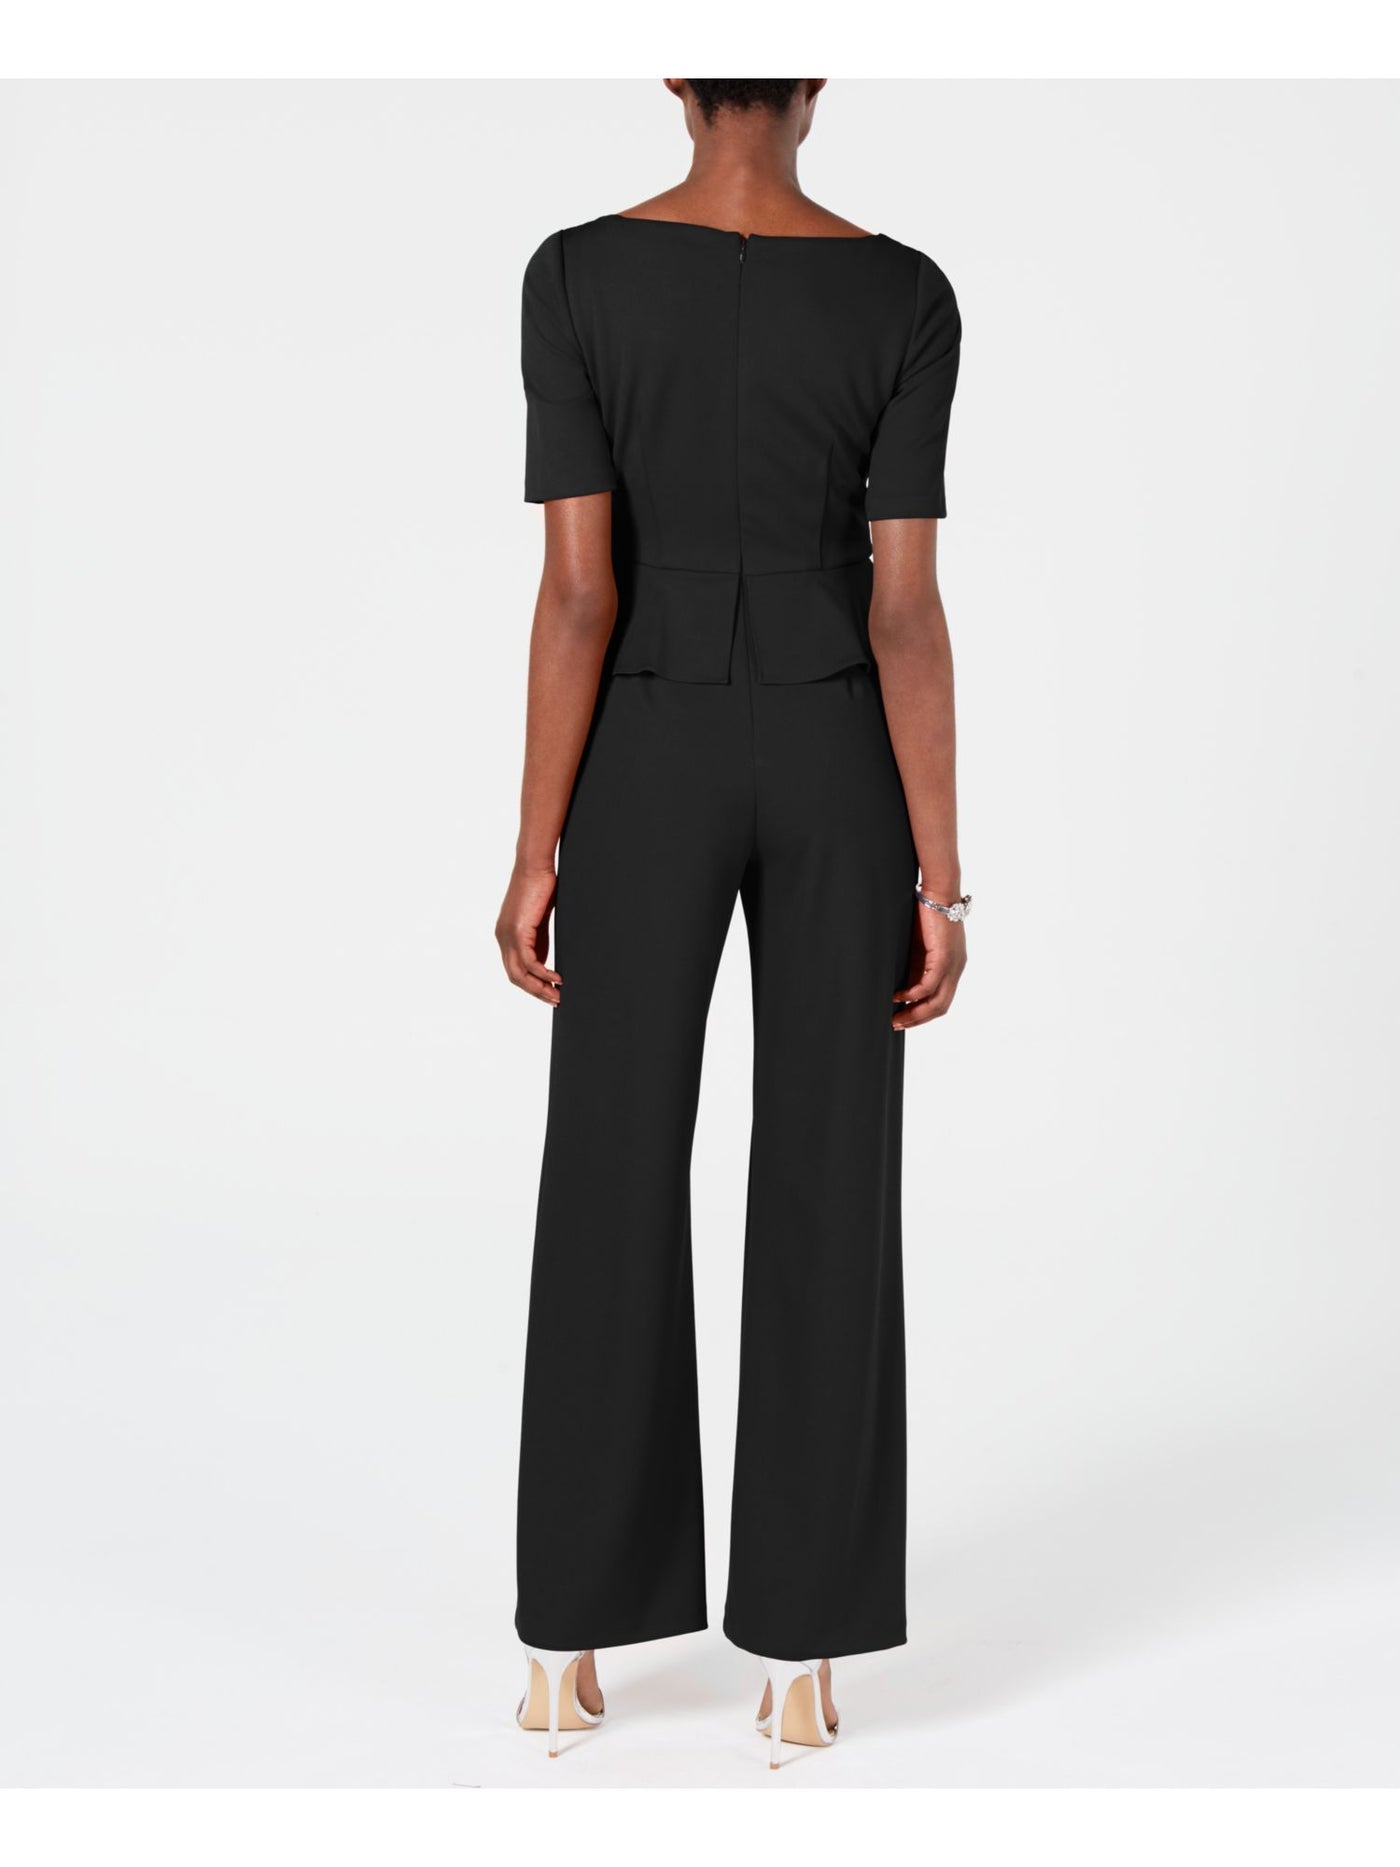 ADRIANNA PAPELL Womens Black Gathered Short Sleeve V Neck Cocktail Wide Leg Jumpsuit 2